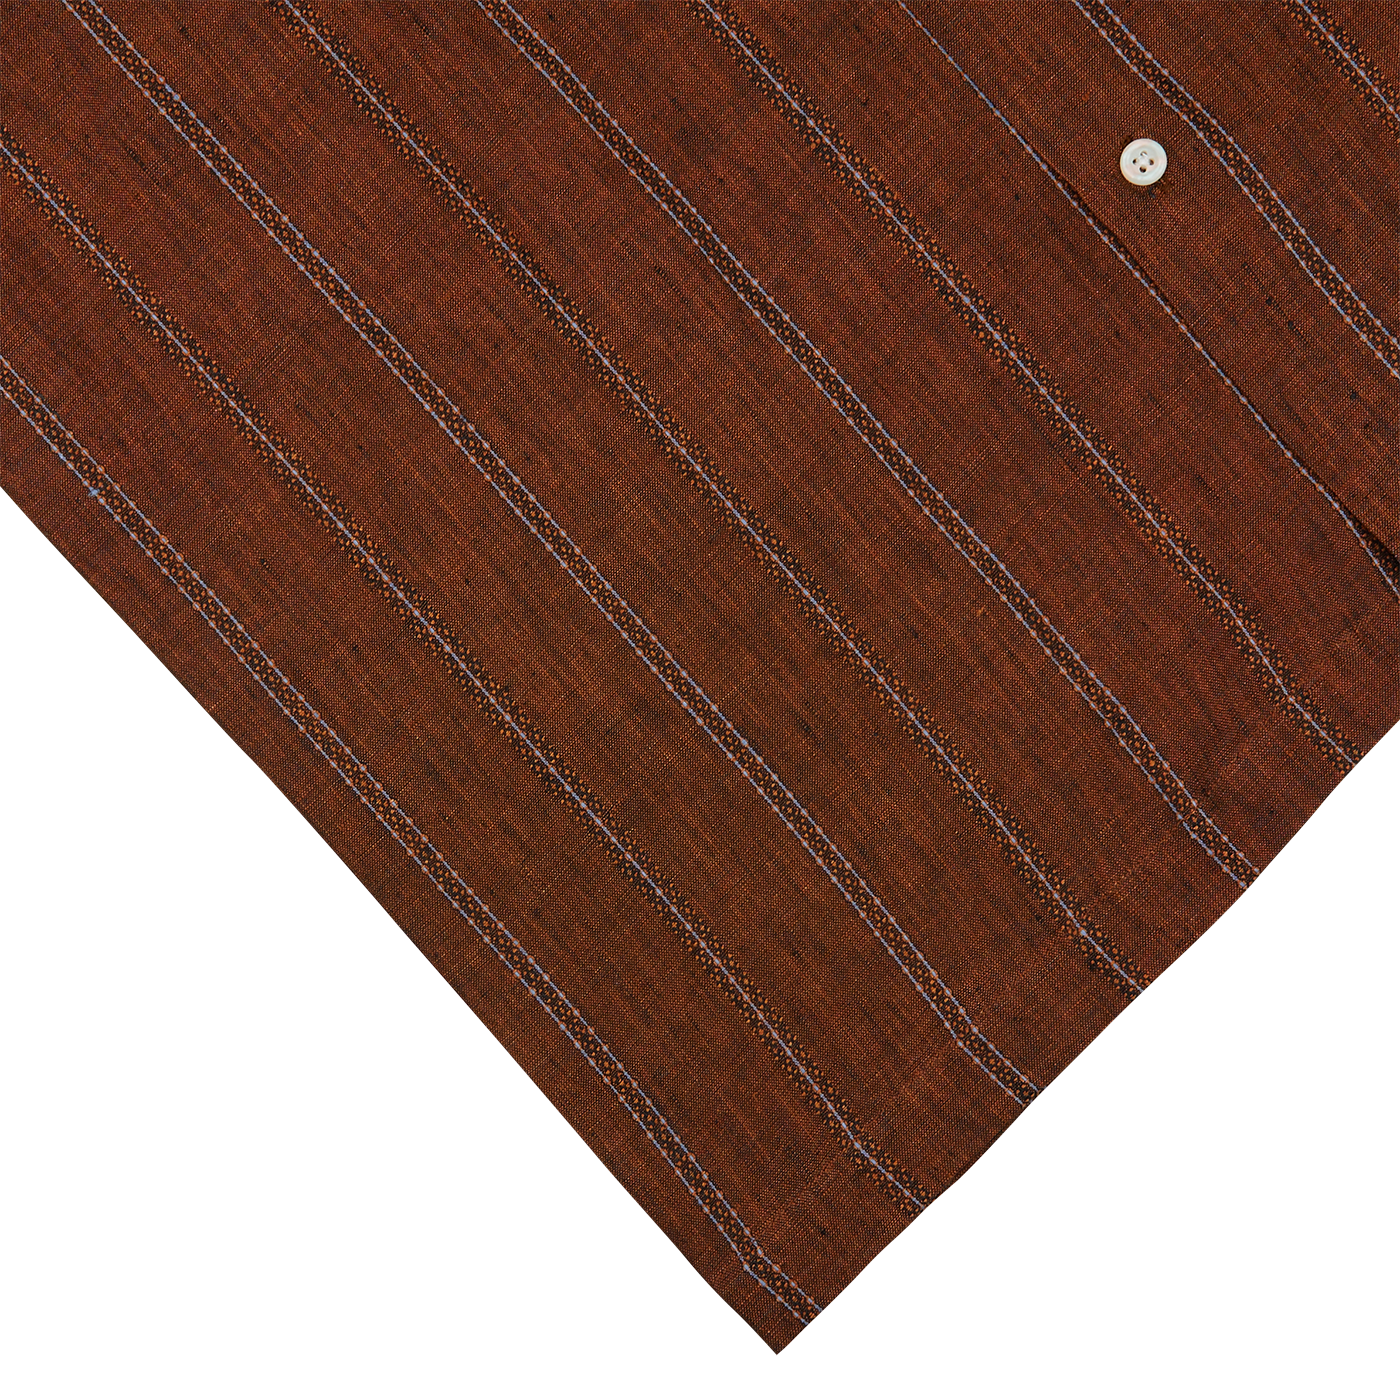 An image of a rust brown striped Universal Works Linen Road camp collar shirt on top of a white background.